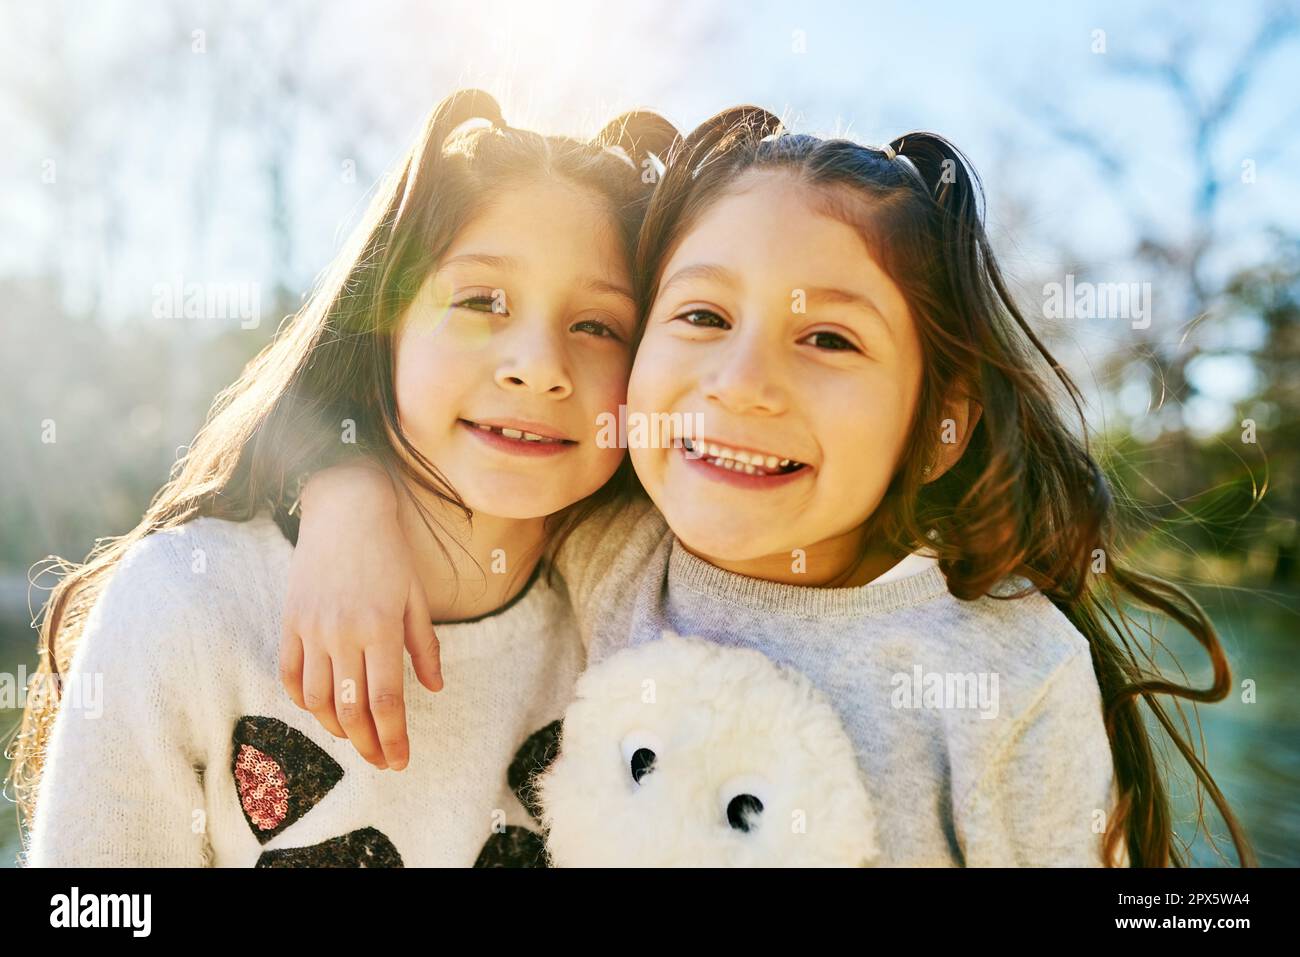 Im lucky my sister is my best friend. two adorable little girls holding each other outdoors Stock Photo